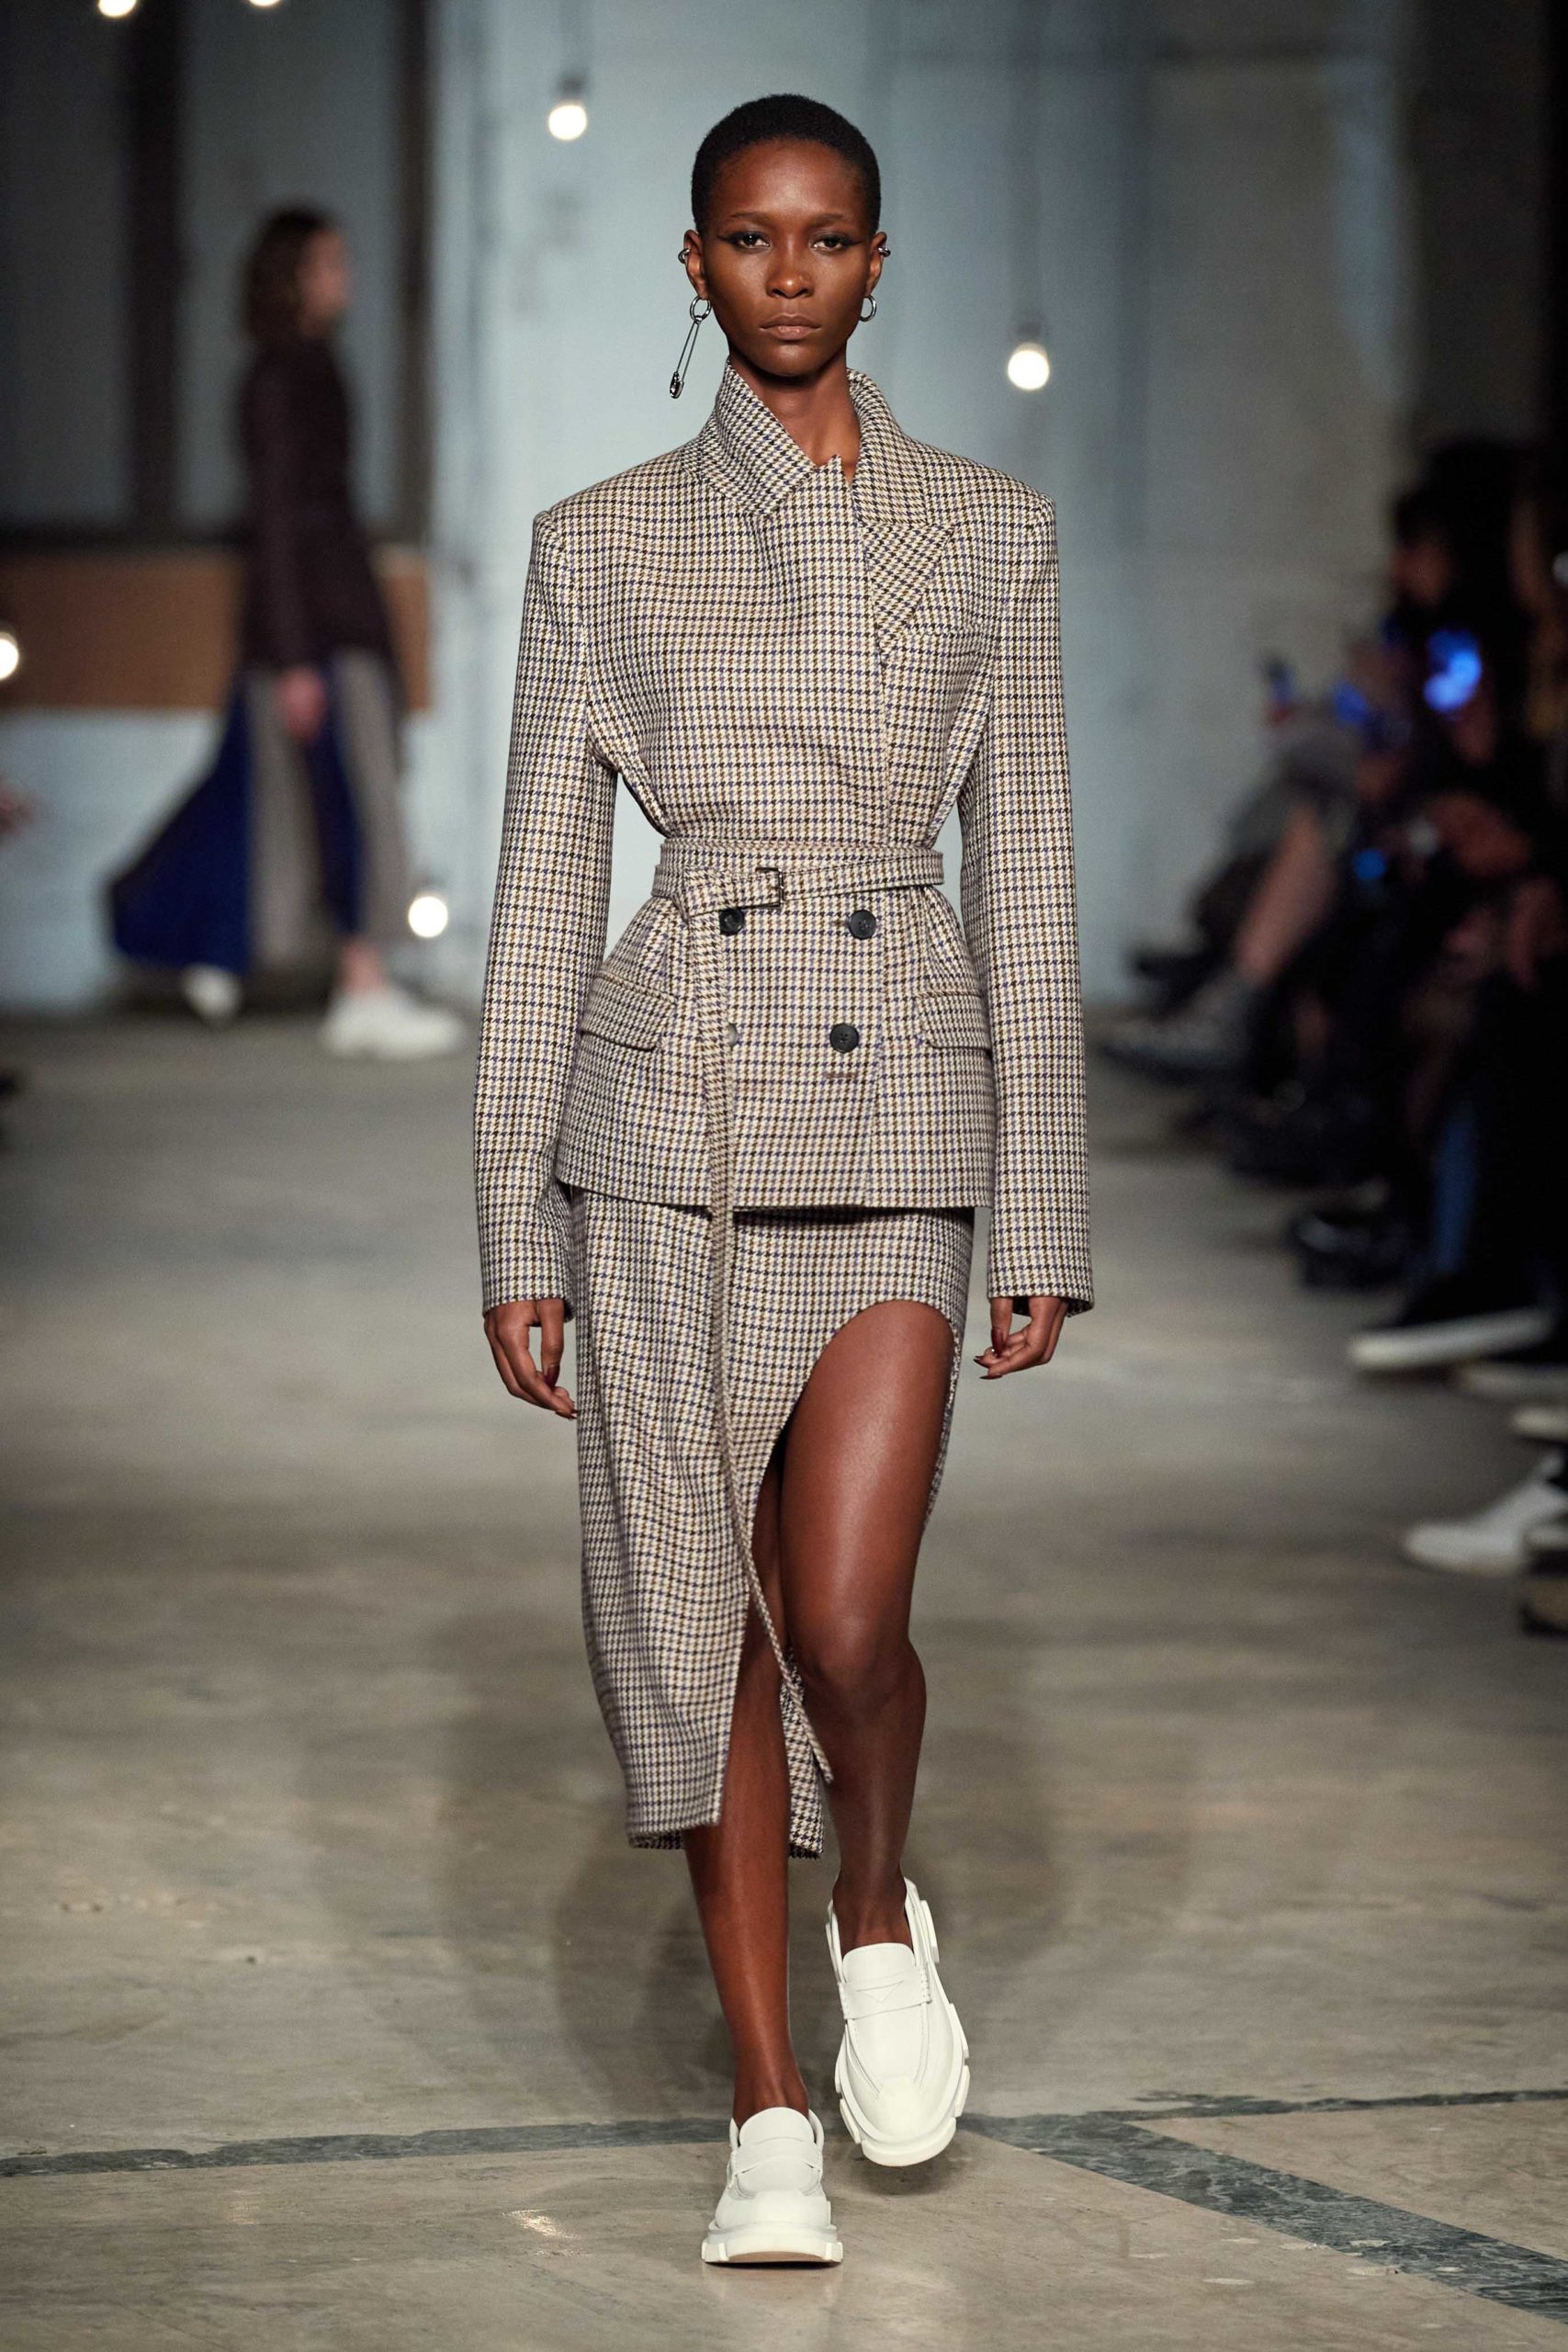 Monse Fall 2020 trends runway coverage Ready To Wear Vogue like shoulder cut out tailleur jupe skirt suit